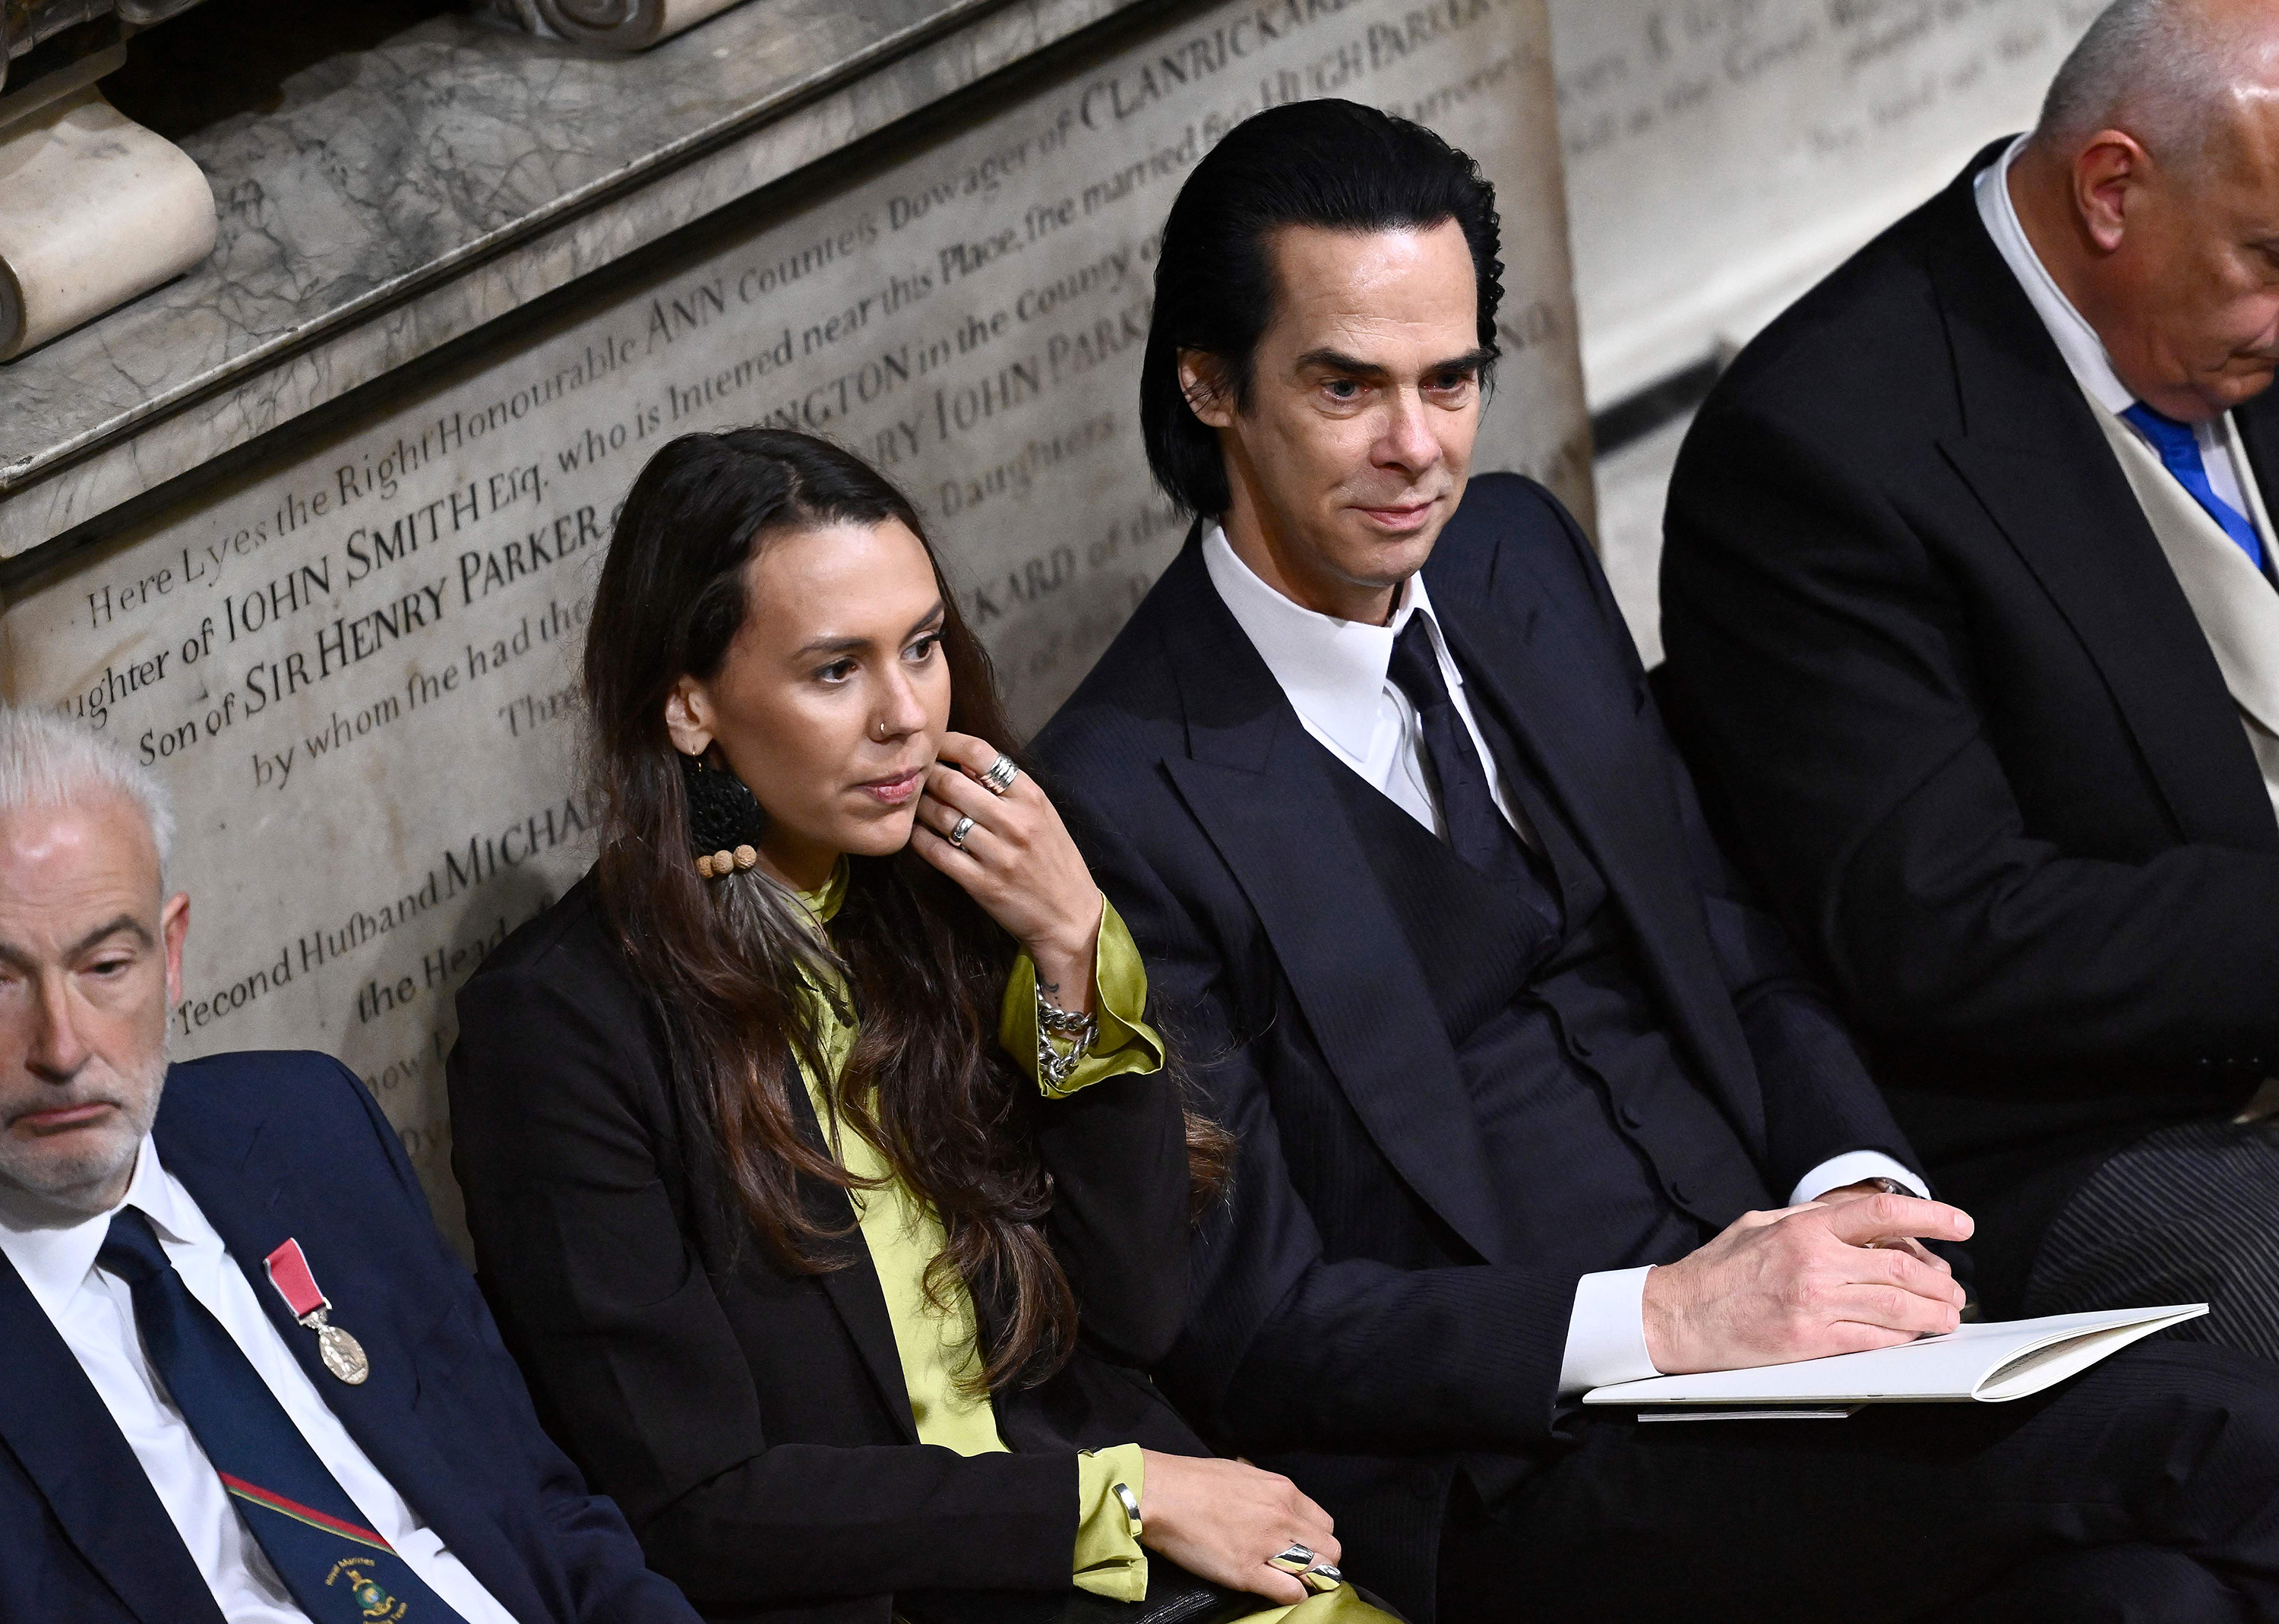 Australian songwriter and singer Nick Cave (R) attends the coronations of Britain's King Charles III and Britain's Camilla, Queen Consort at Westminster Abbey in central London on May 6.